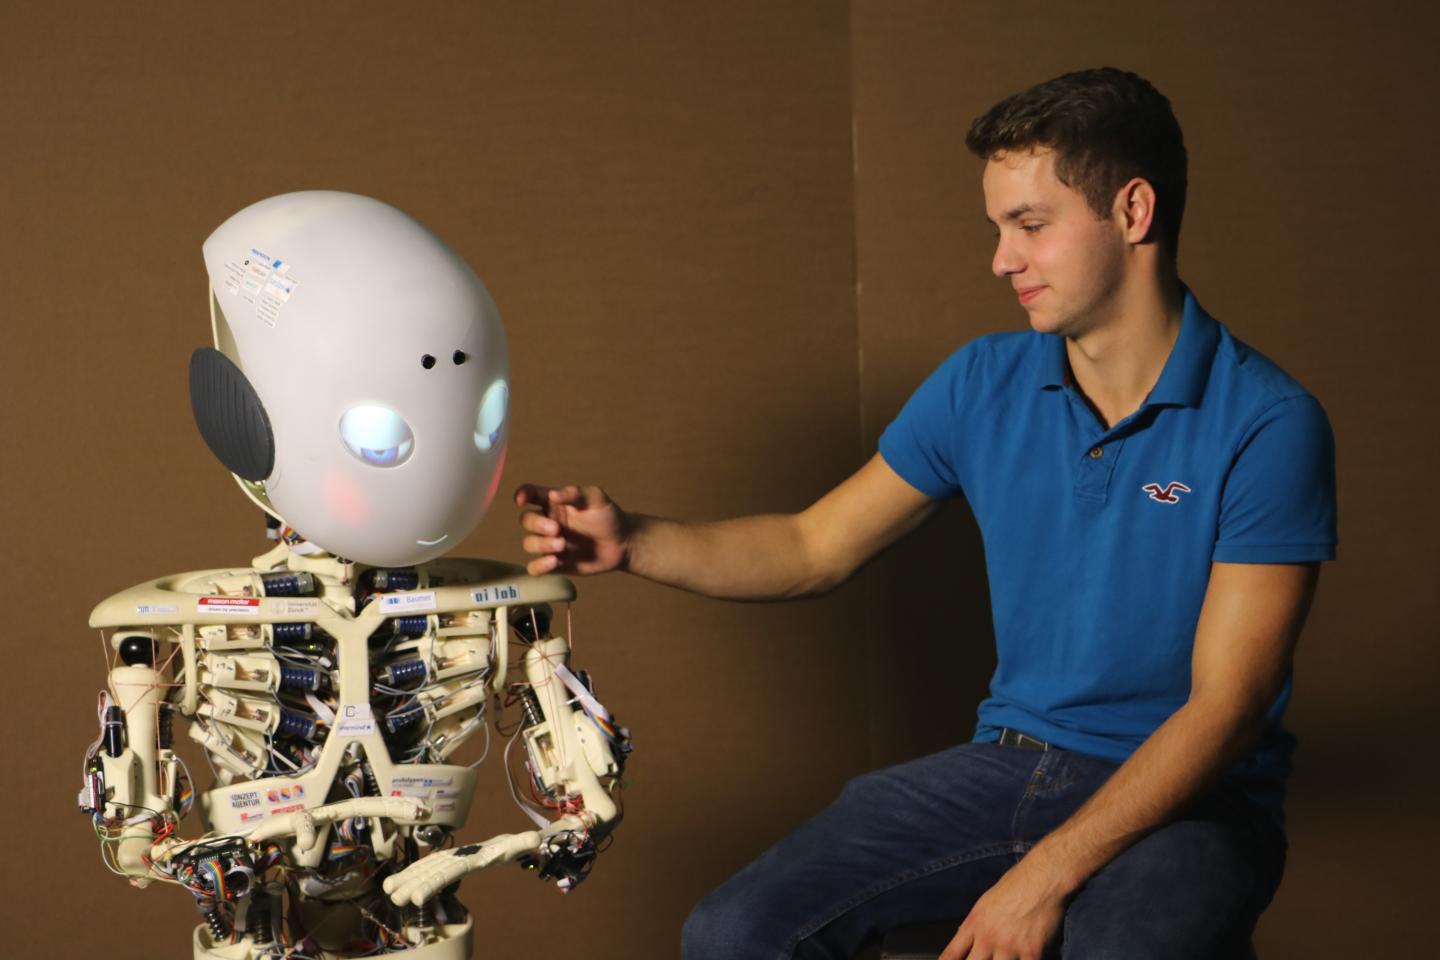 Interacting with Roboy Robot